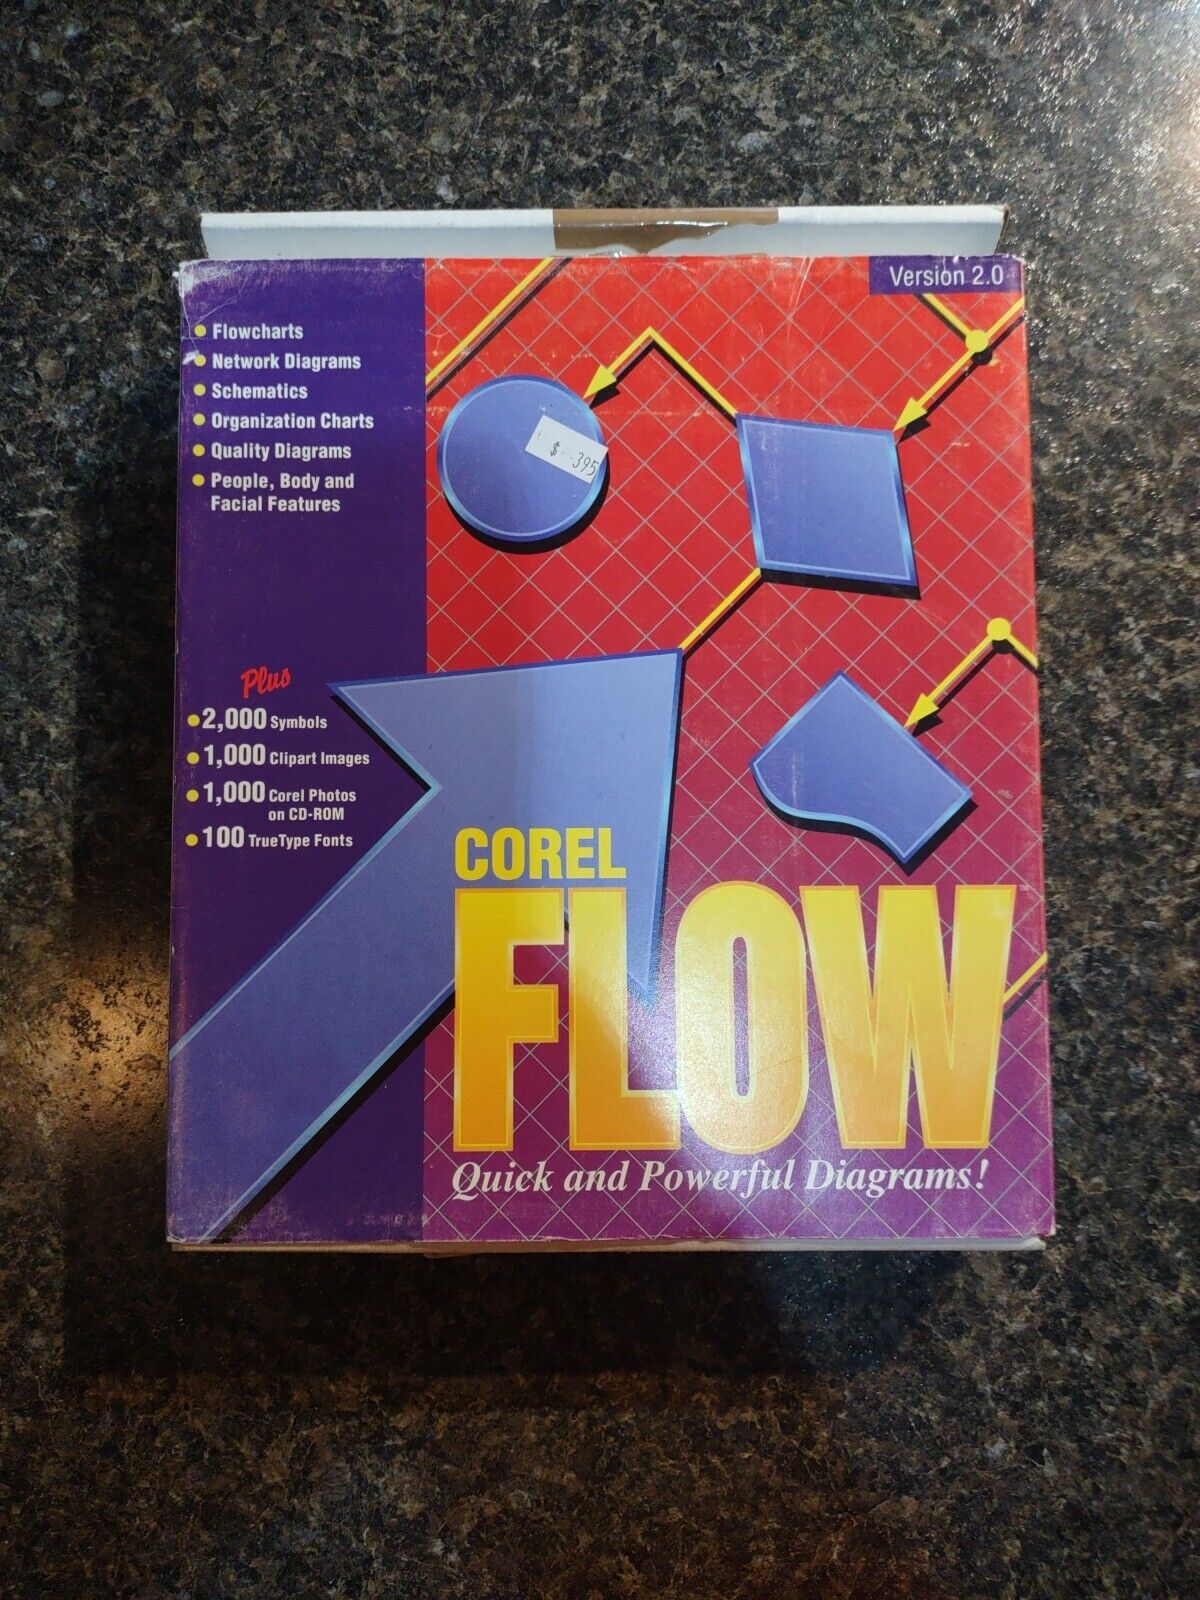 Vintage Copy of Corel Flow Version 2.0 for PC, Windows 3.1 Required